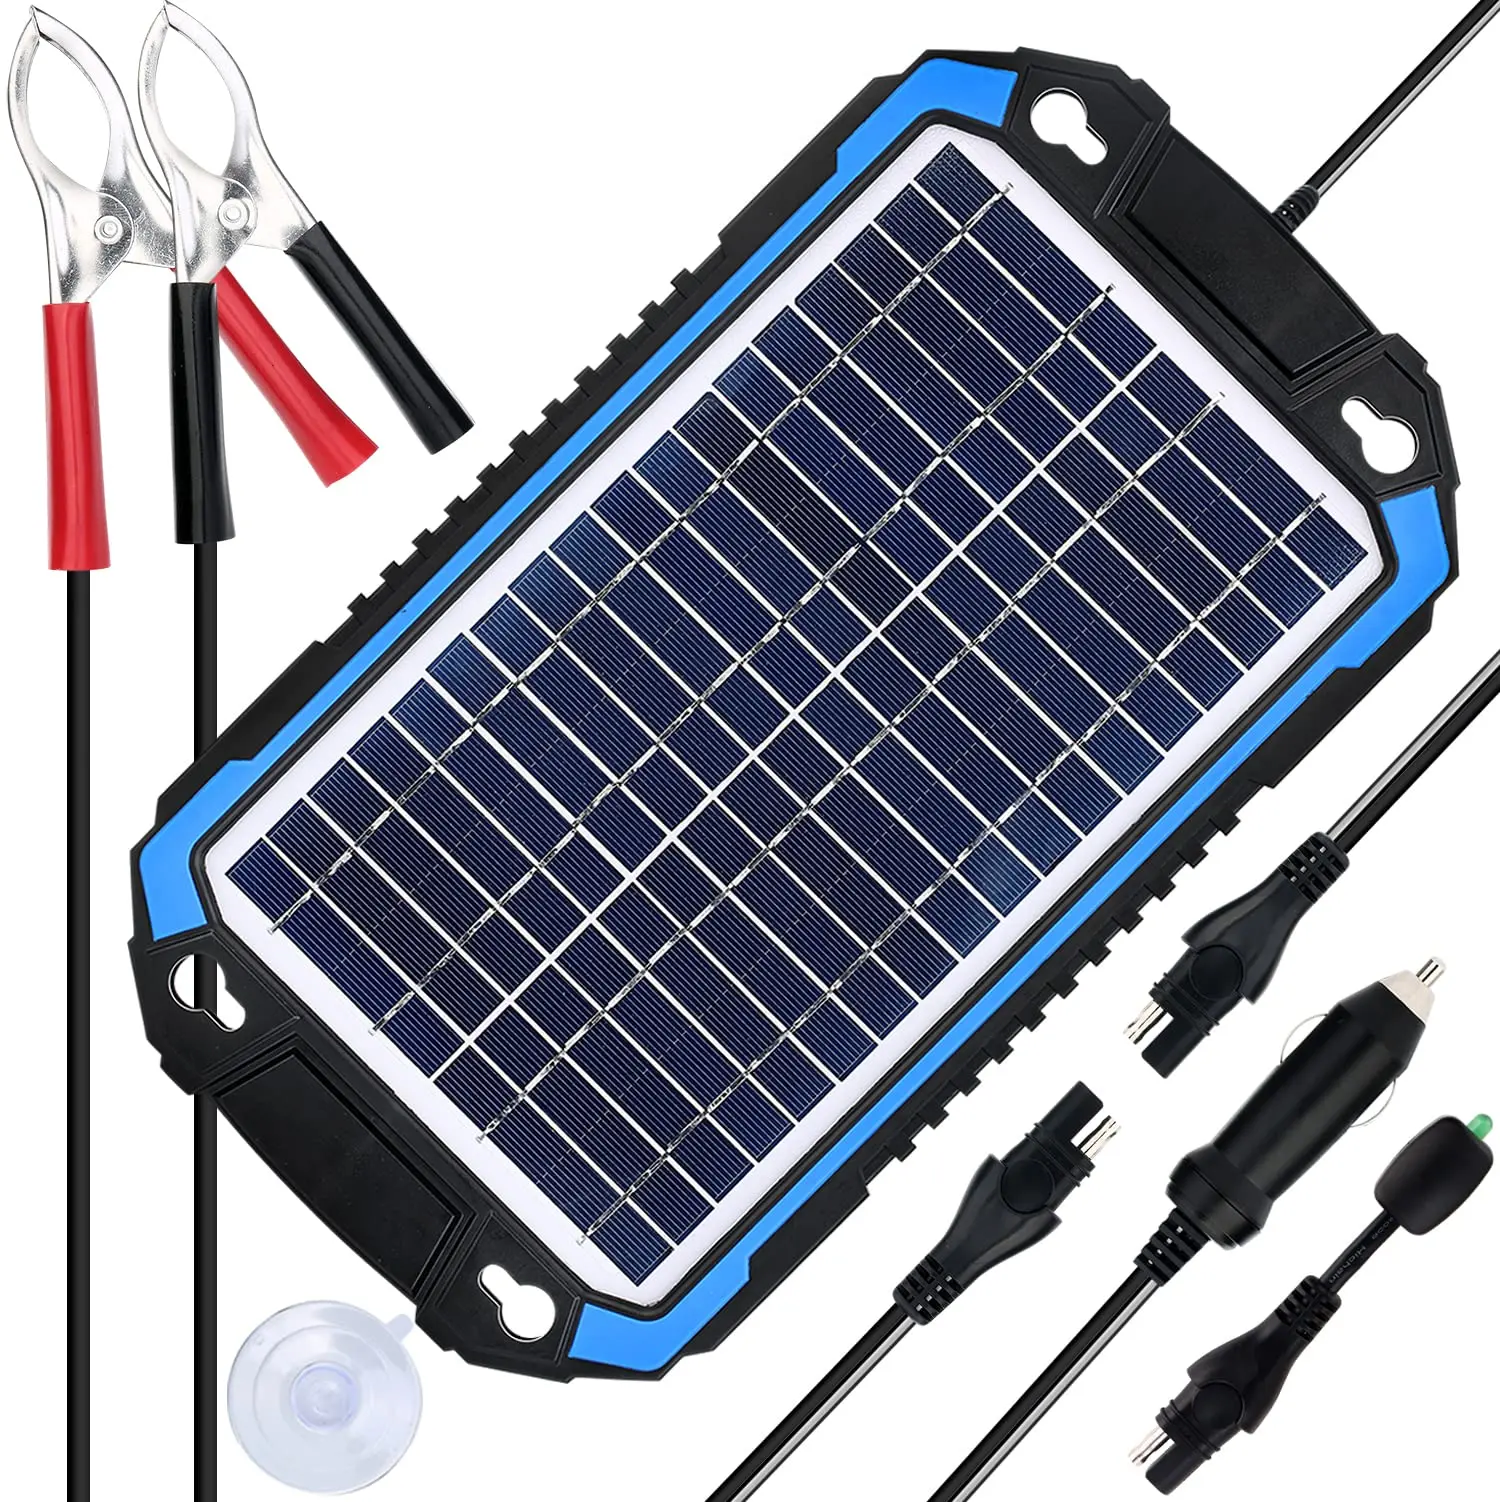 solar panel for car battery - Can I connect solar panel to car battery